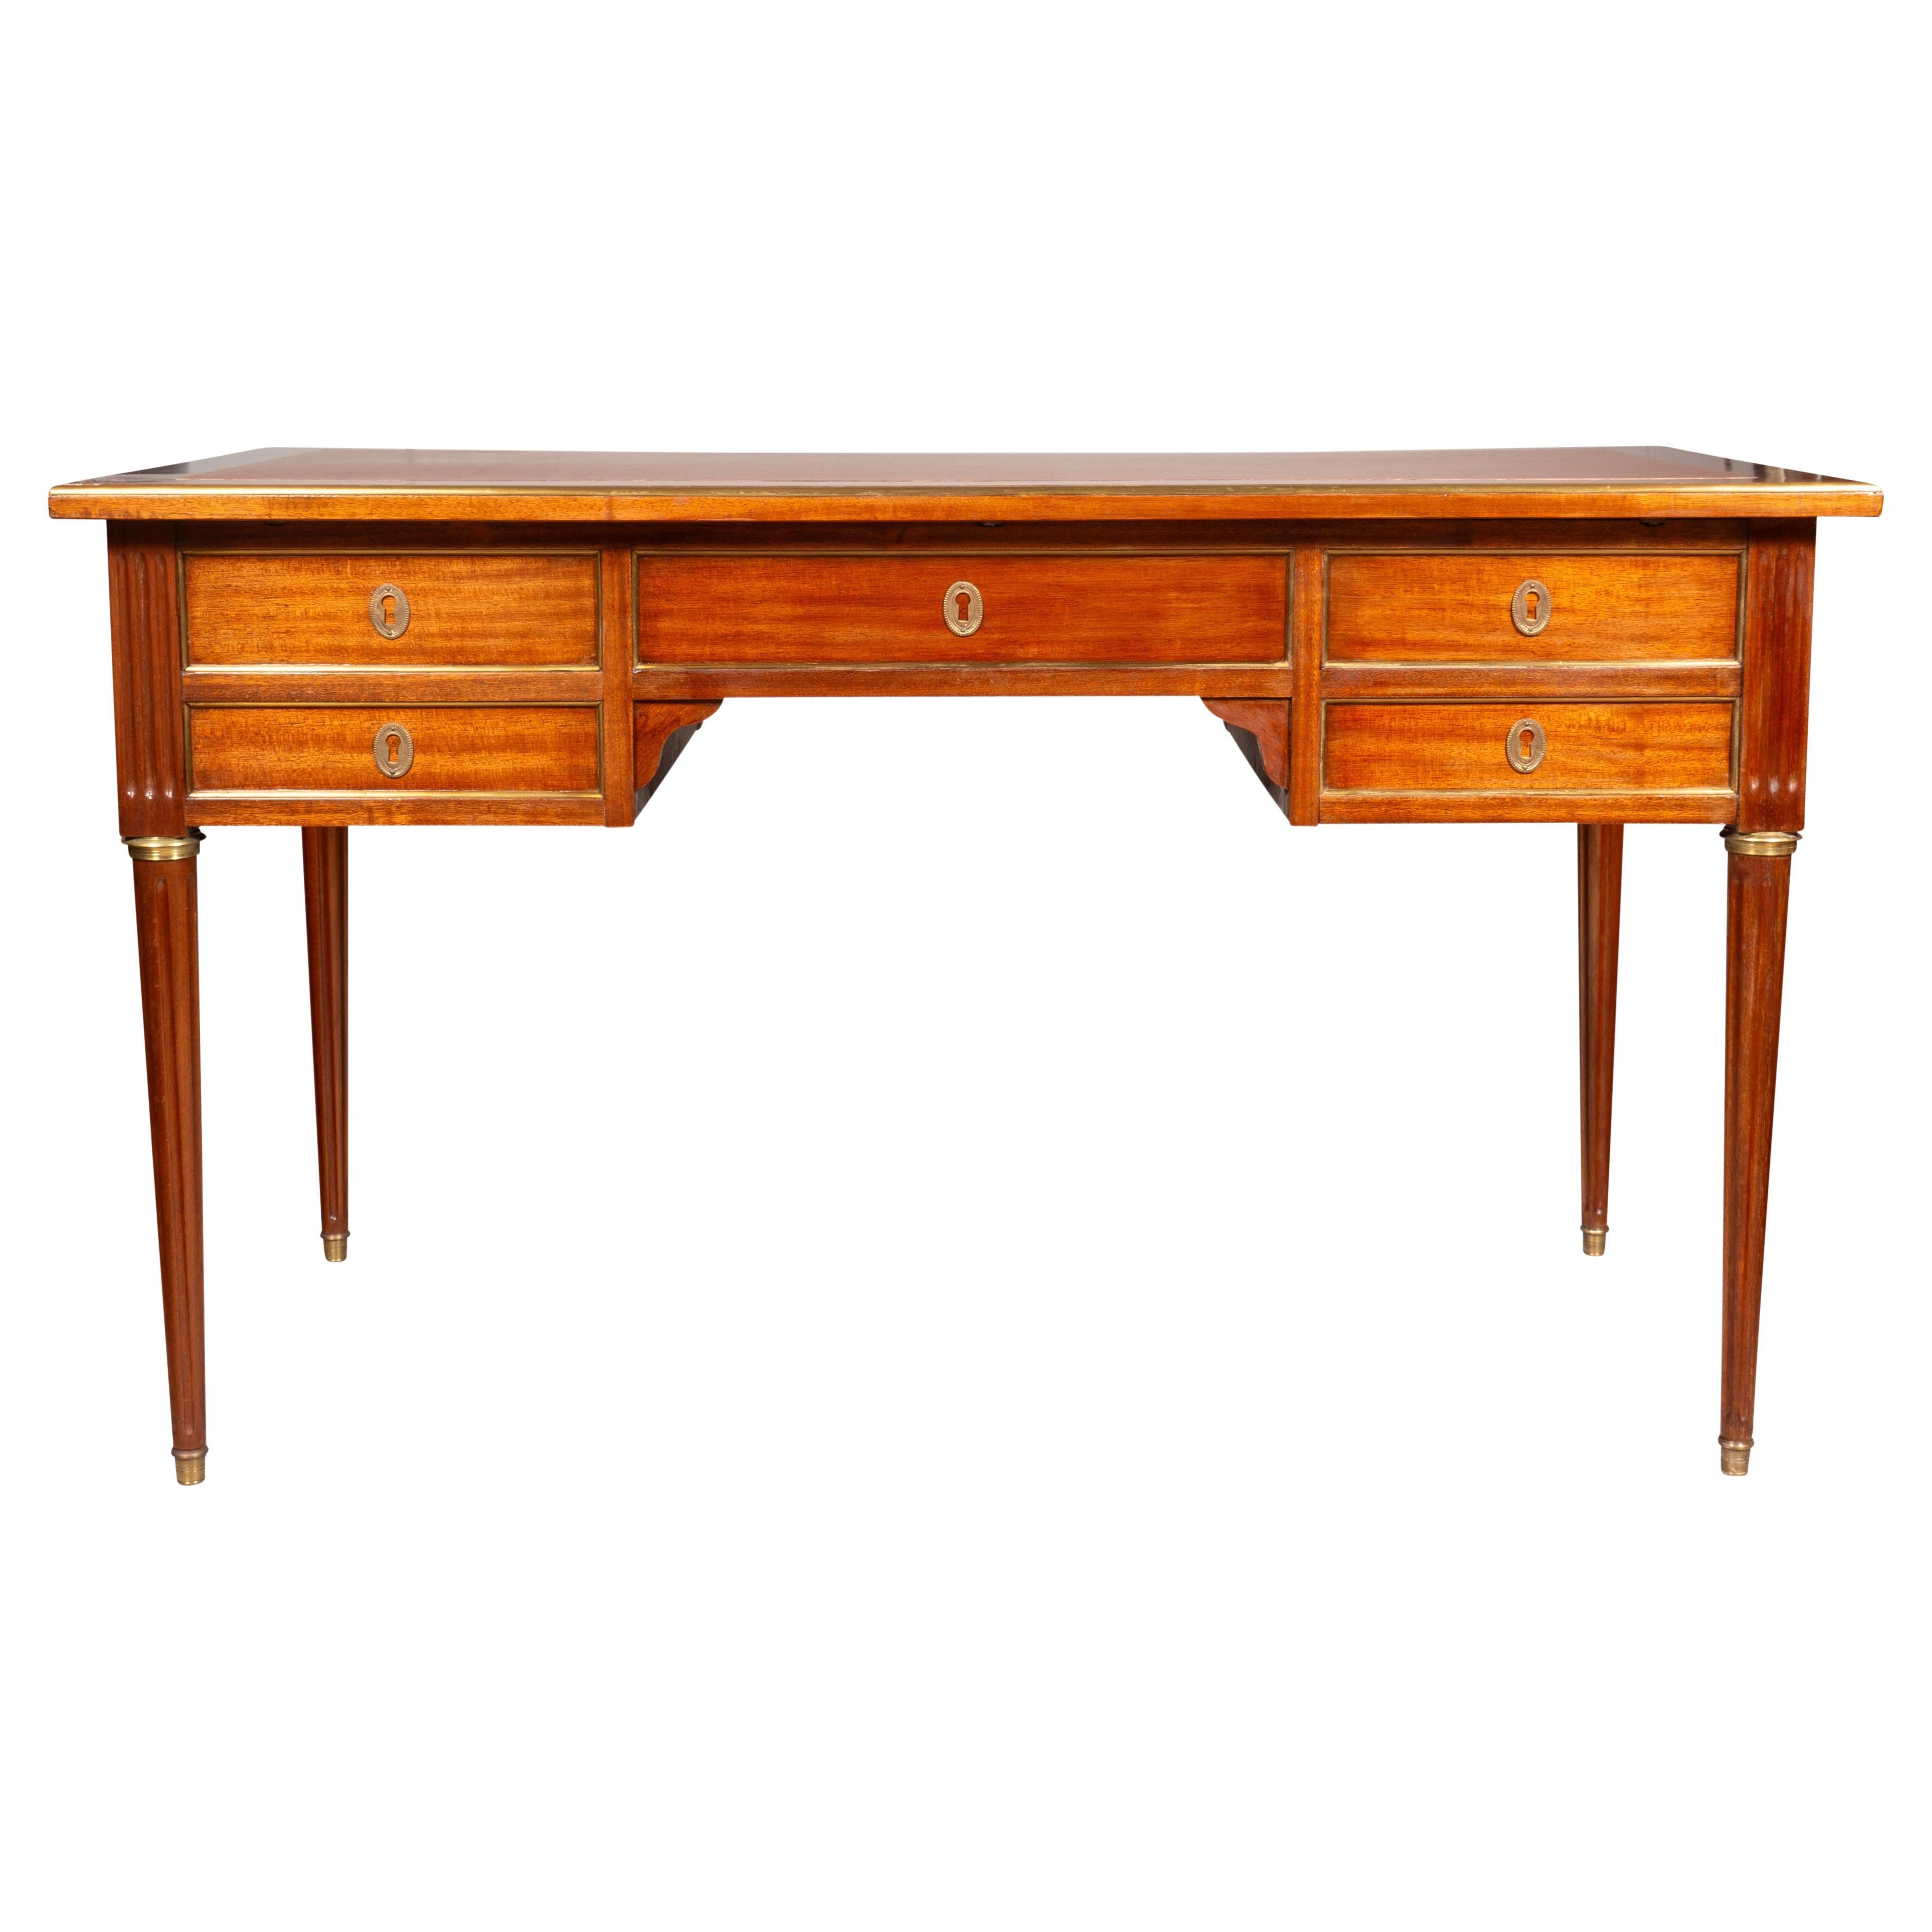 Rectangular top with inset brown leather over a central drawer flanked by a deep drawer and two single drawers. Finished on back with false drawers. Raised on circular tapered fluted legs and sabot feet.